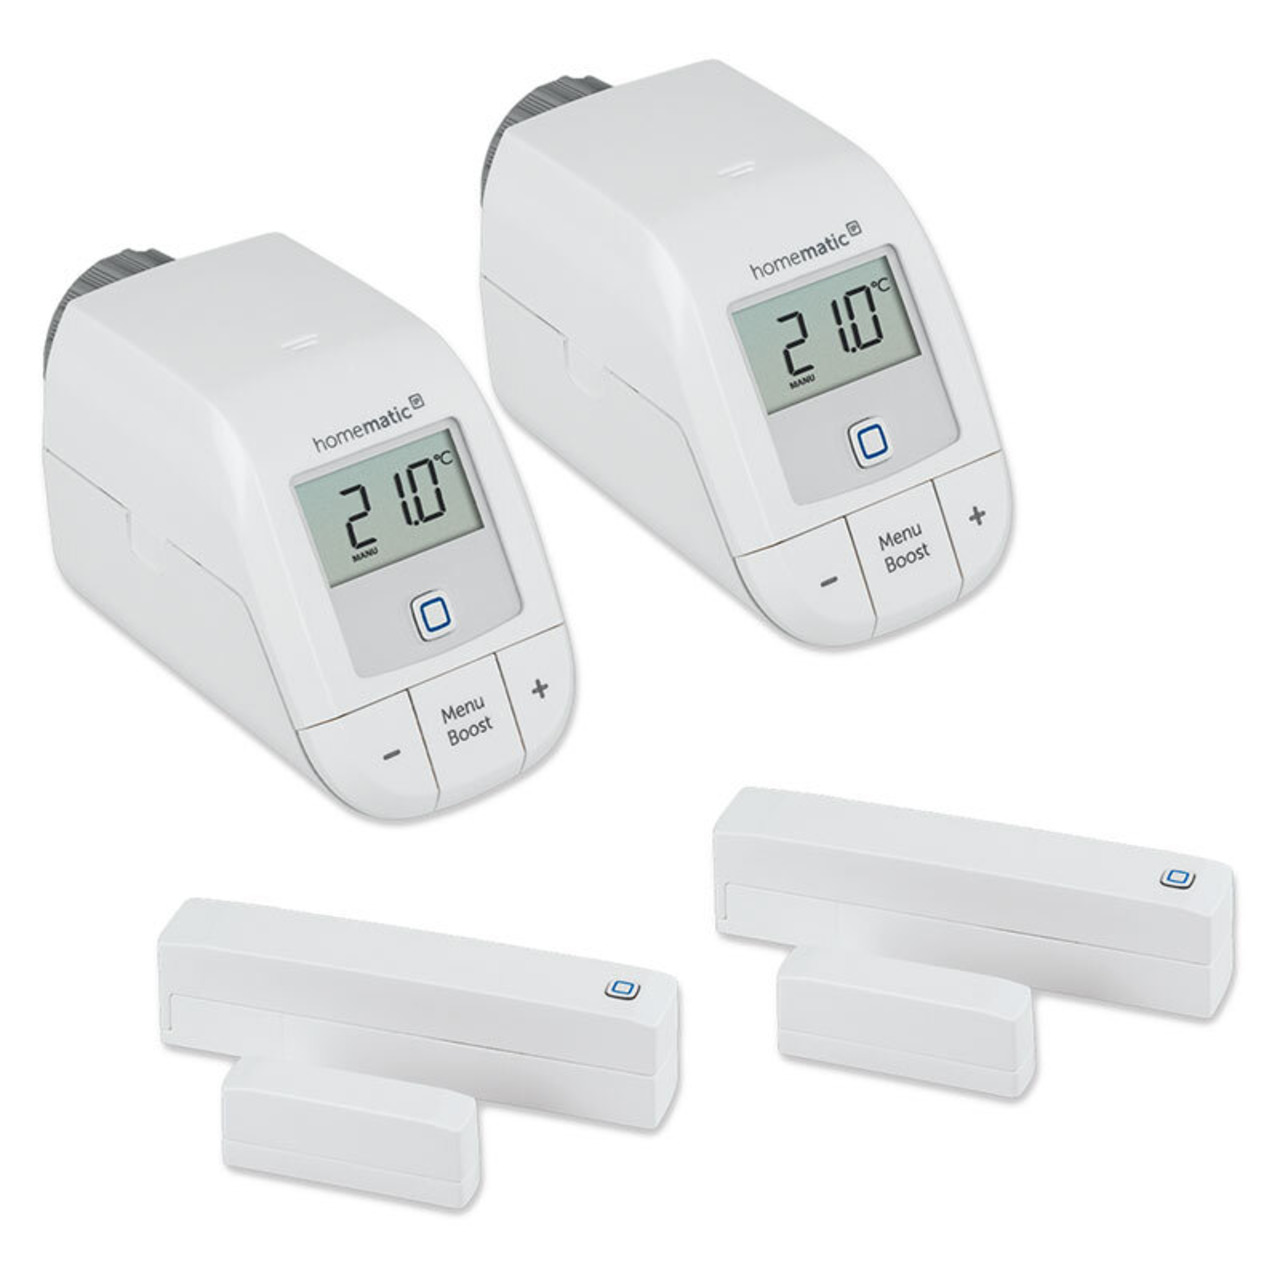 2er Set Homematic IP Heizen - easy connect unter Hausautomation